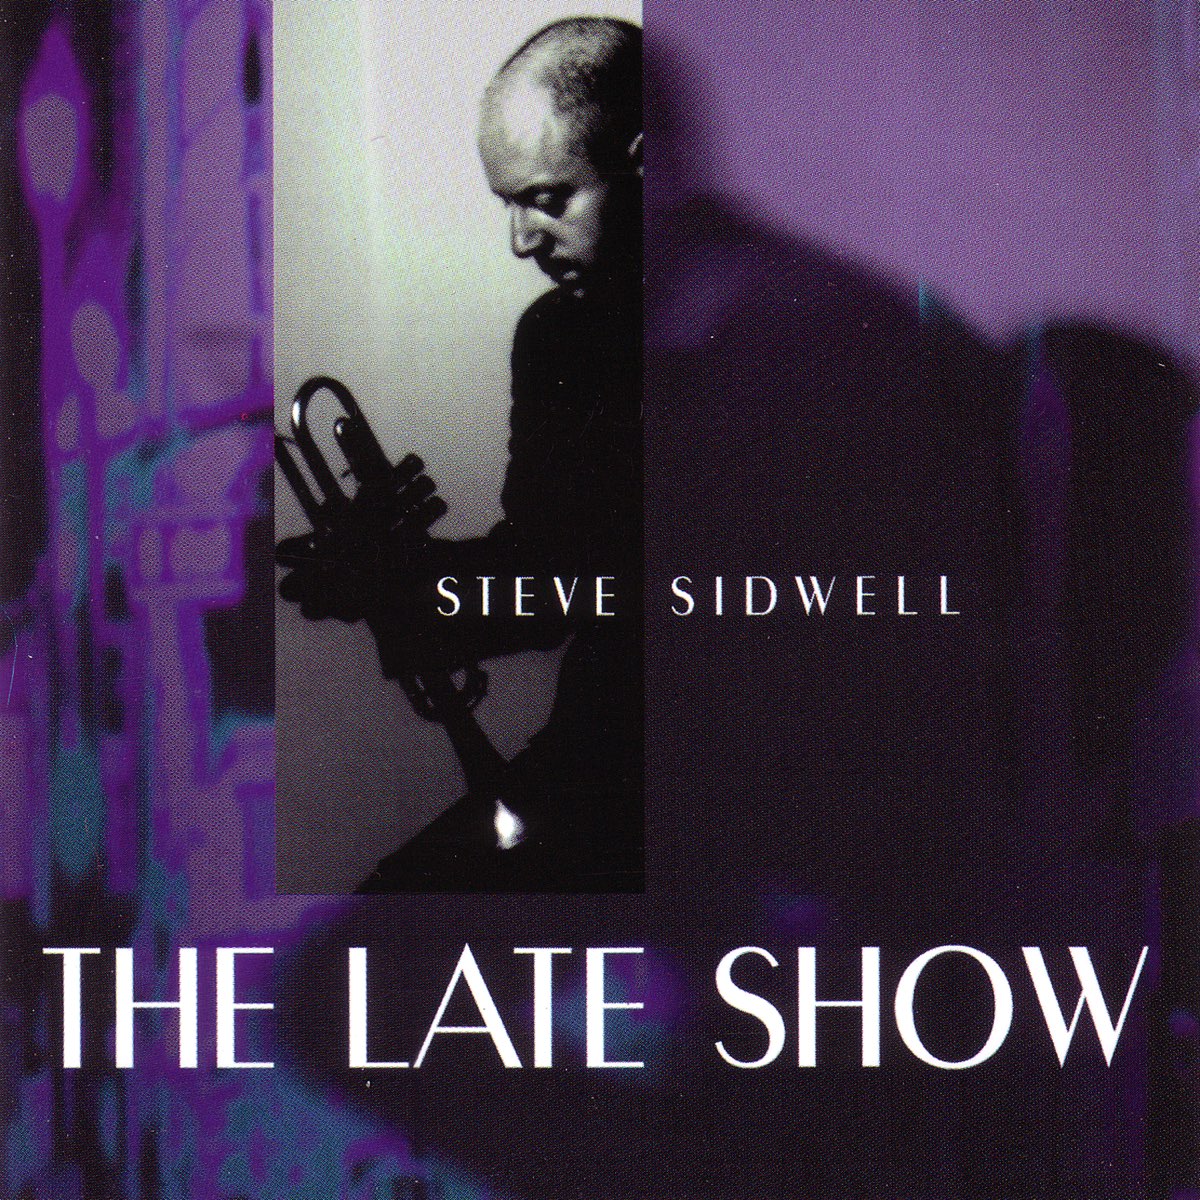 The Late Show by Steve Sidwell on Apple Music